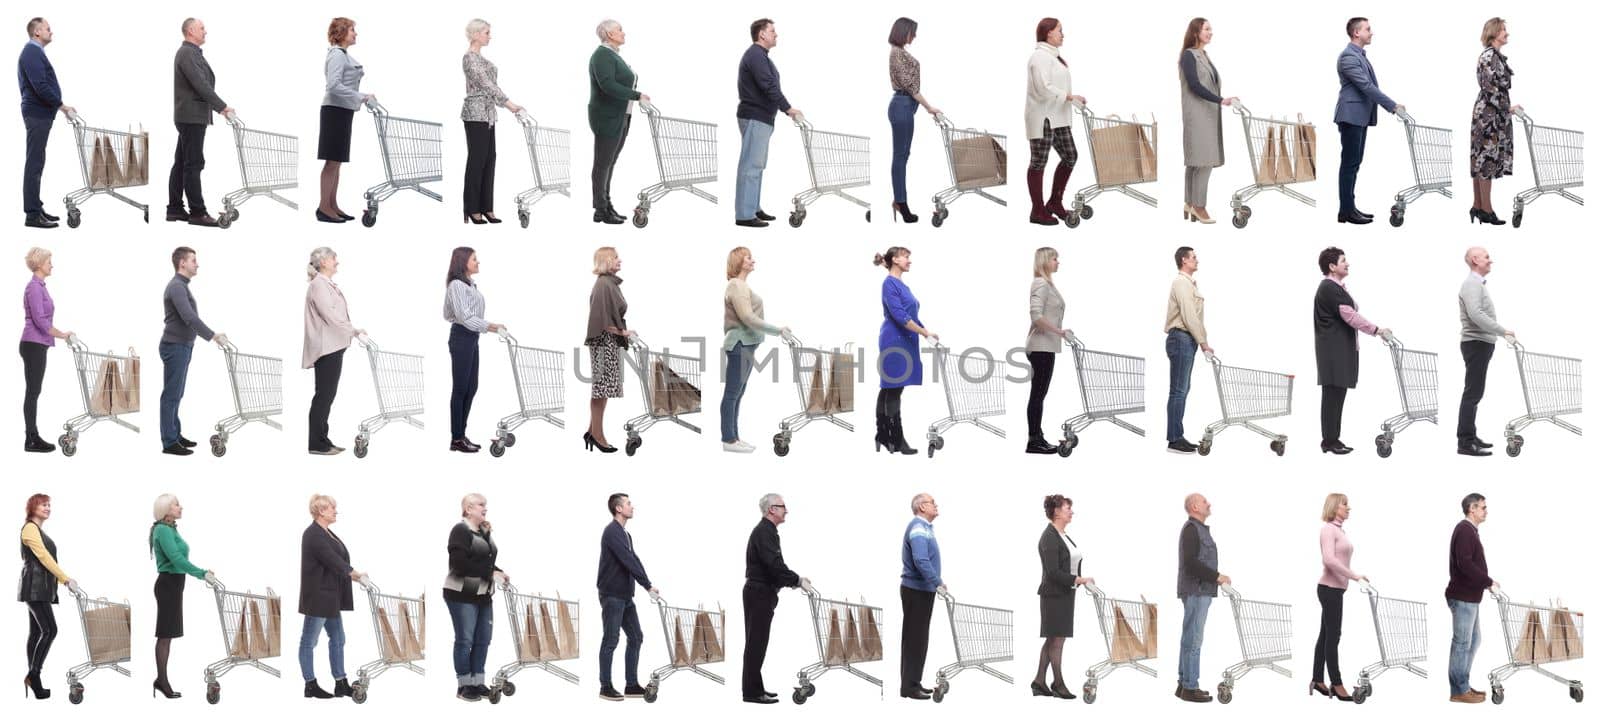 group of people with cart looking ahead isolated on white background